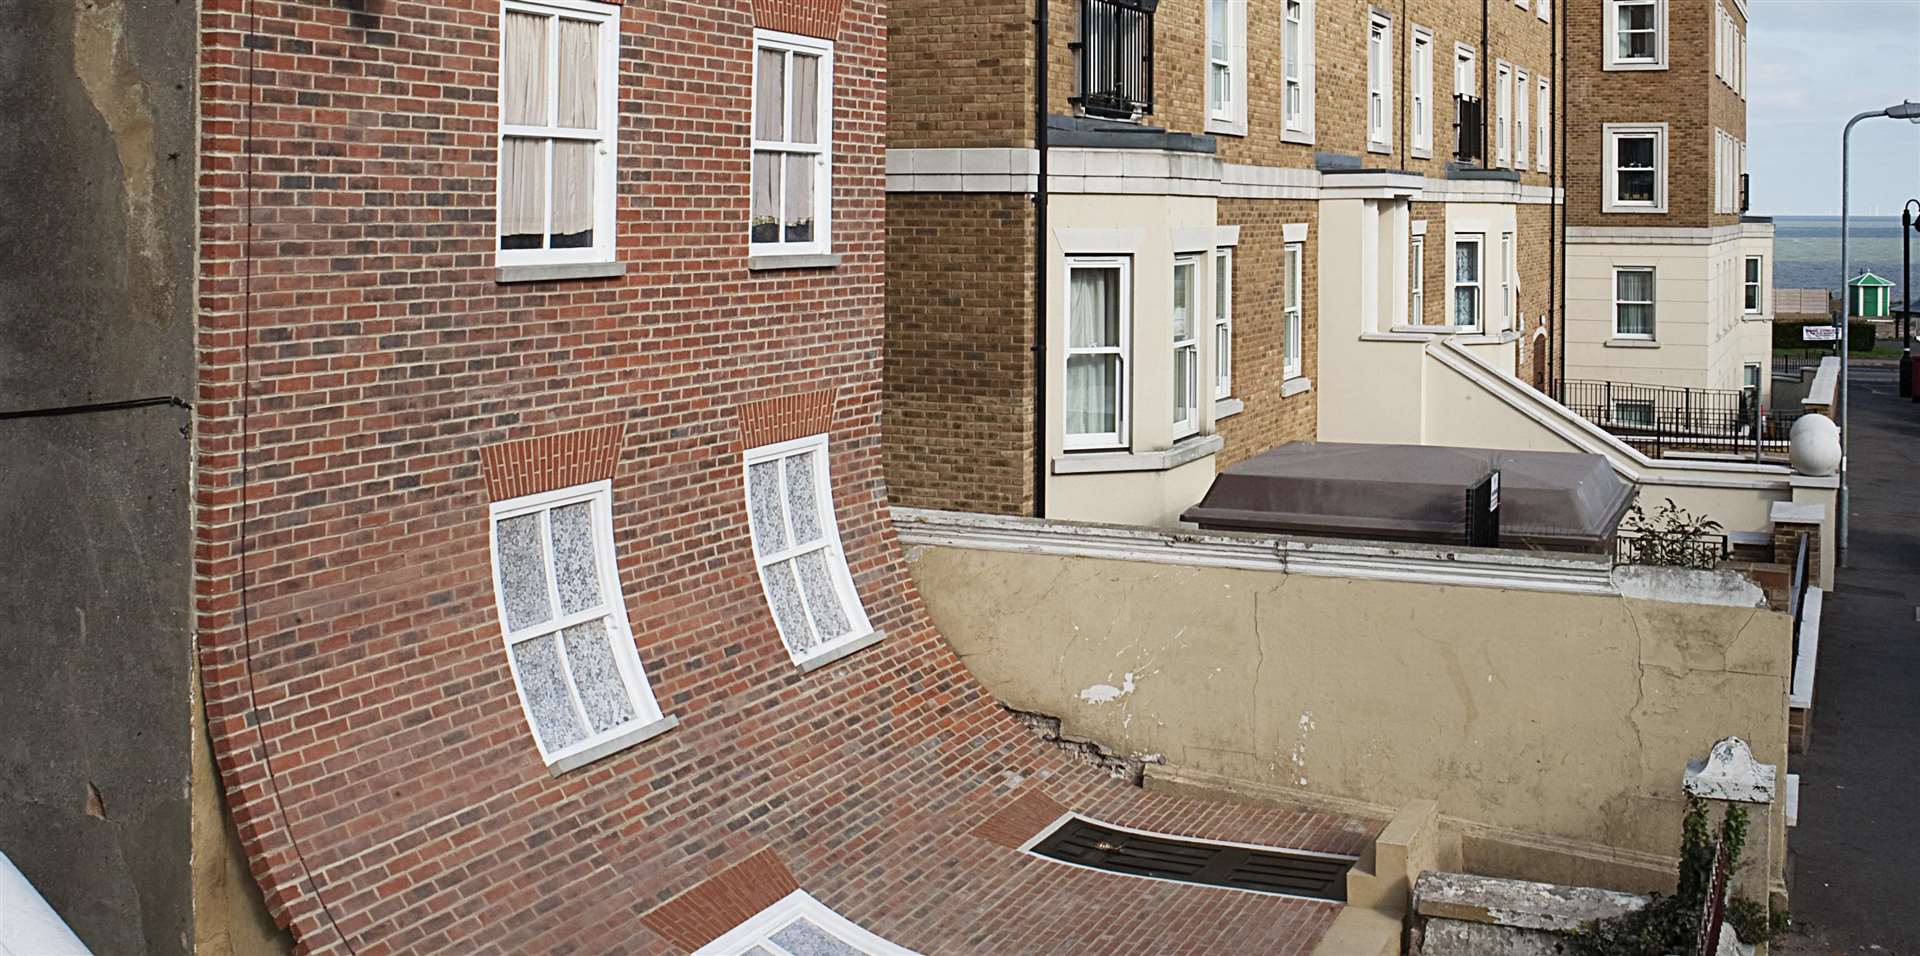 The mid-19th century house in Margate which was transformed by Alex Chinneck in 2013